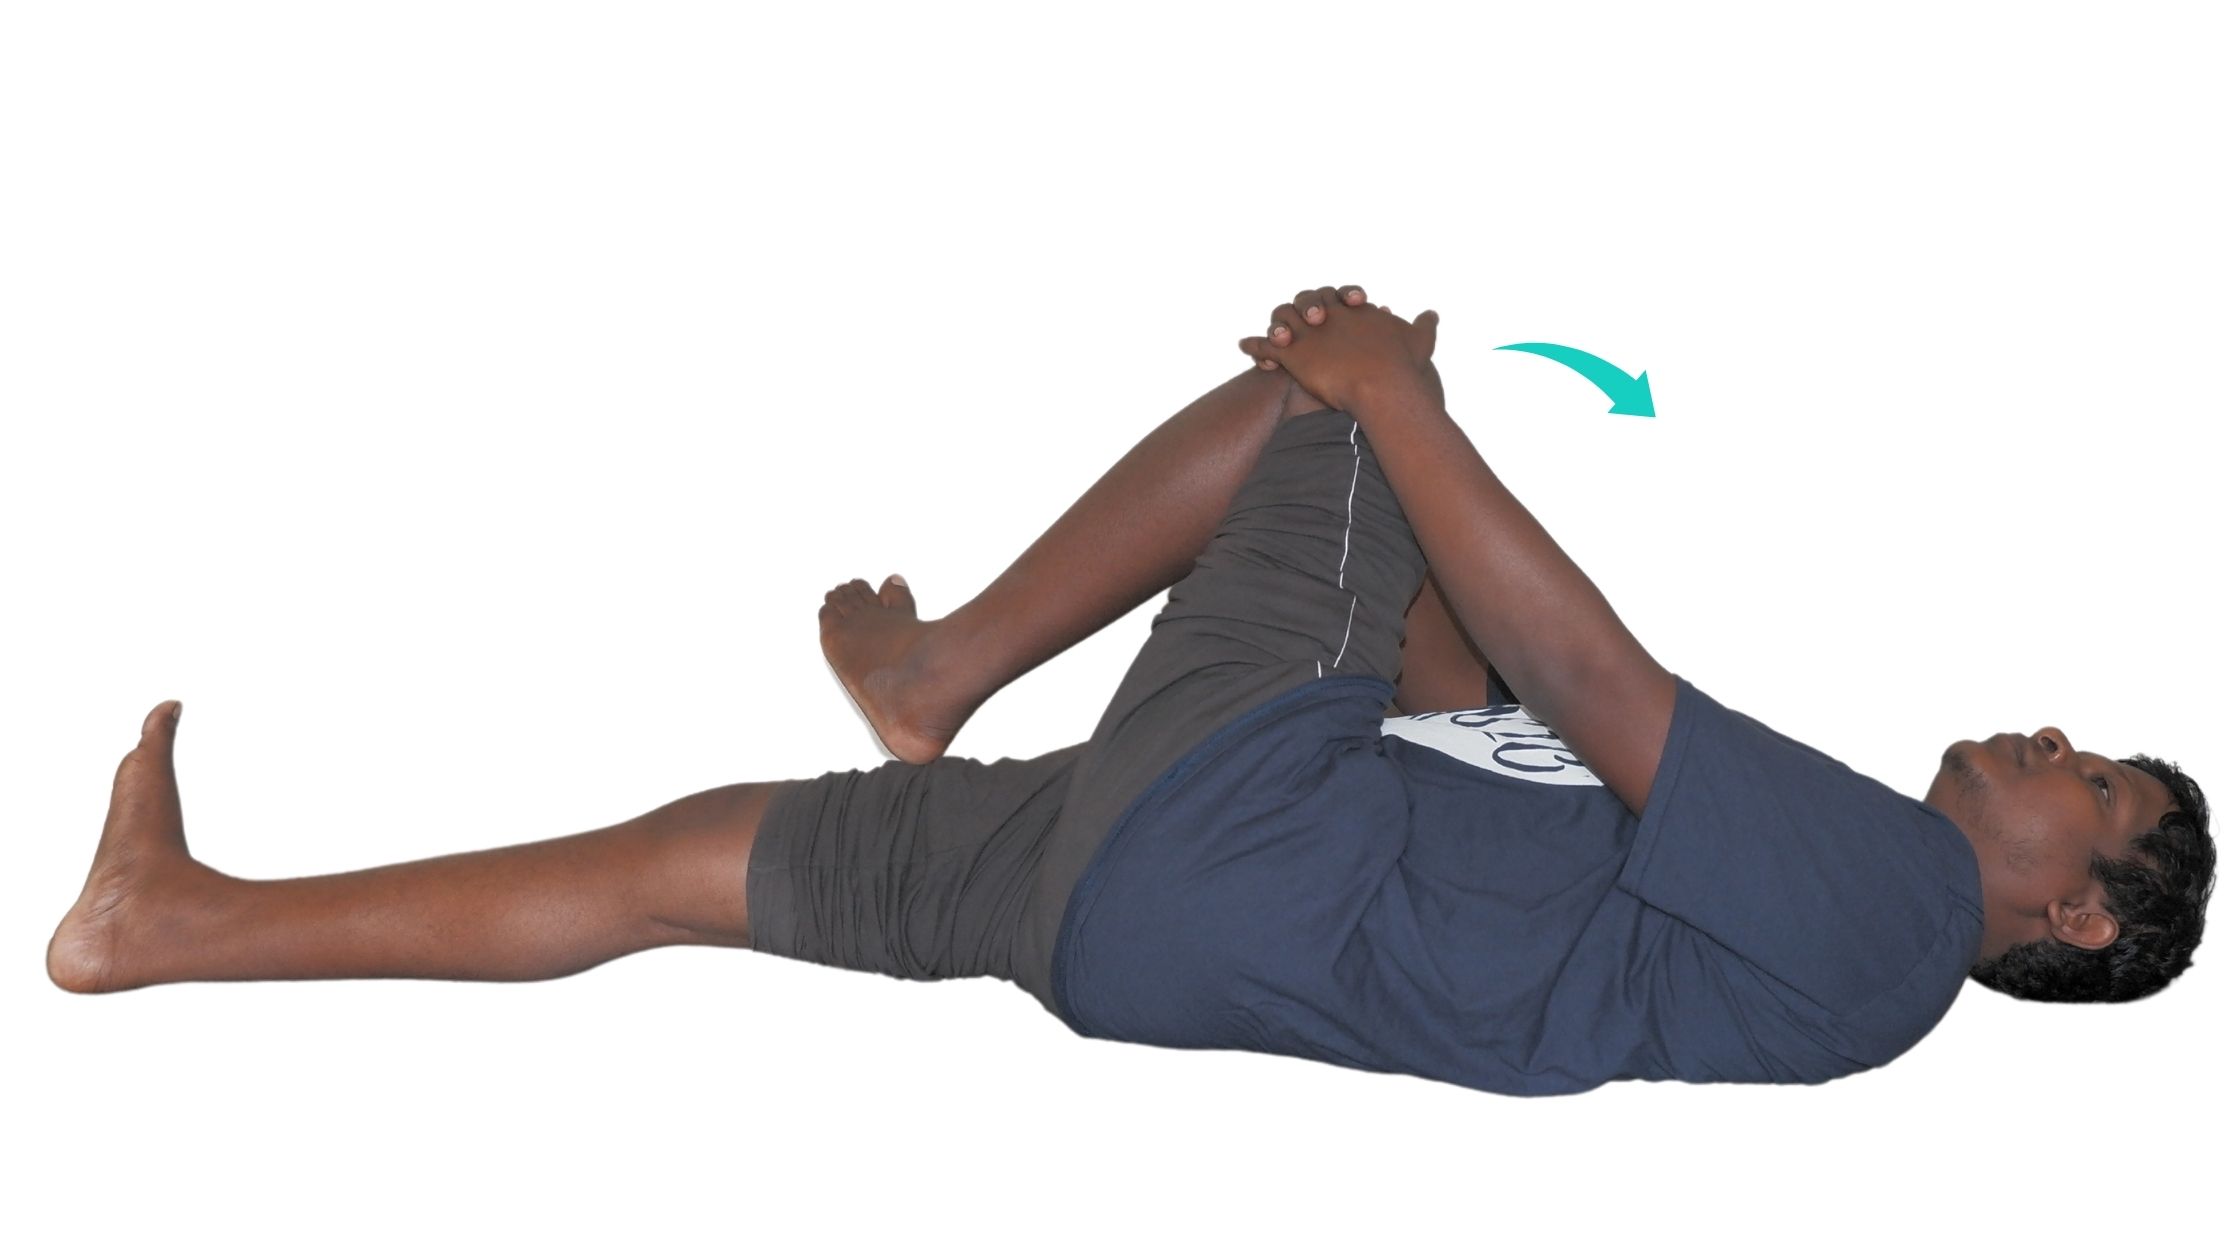 10 Stretches for Sciatica Pain Relief - Om Physio Plus Nutrition